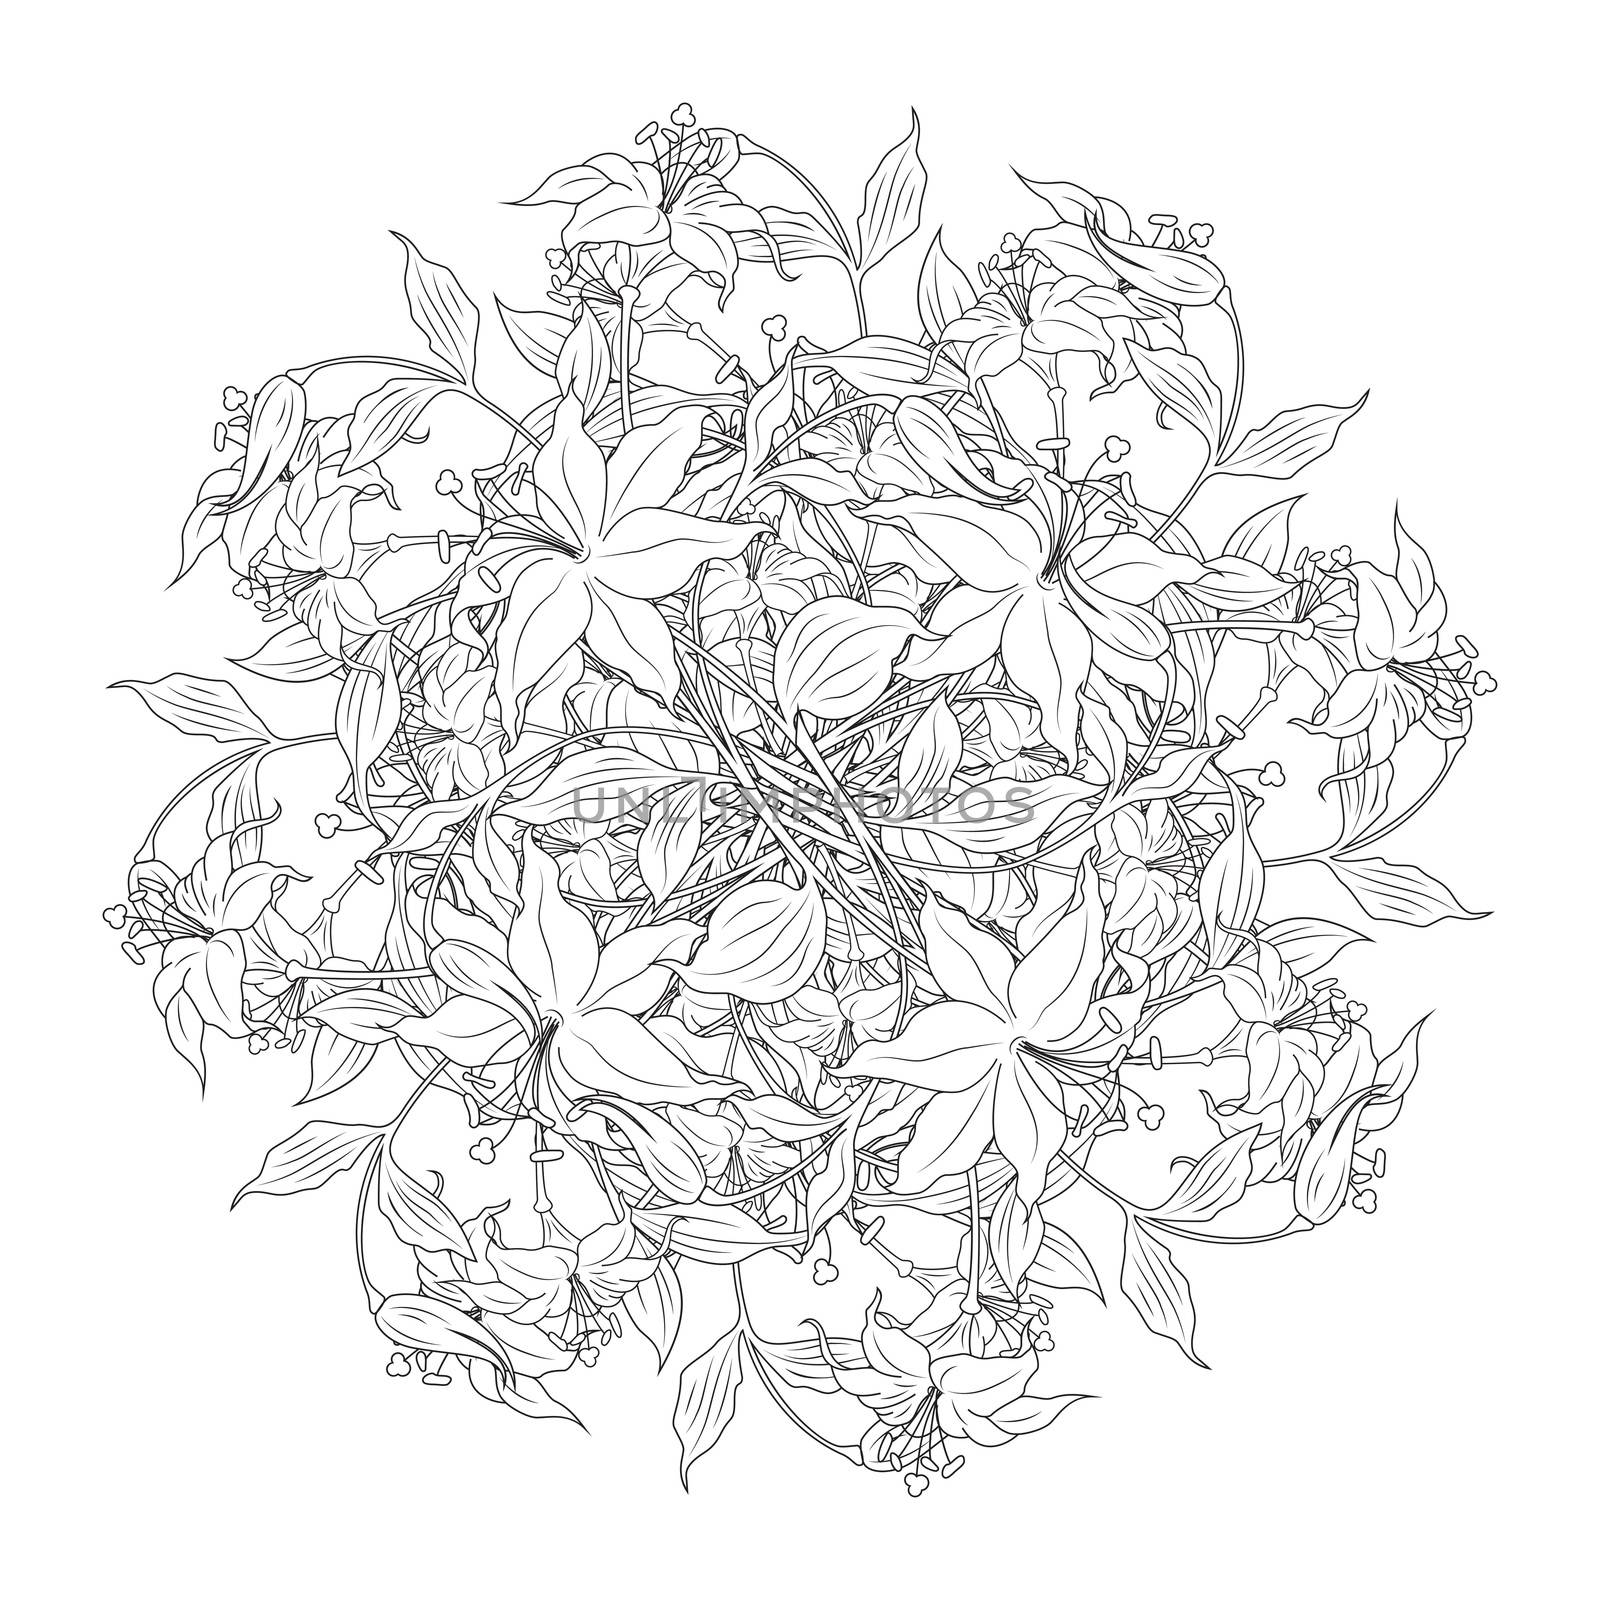 bouquet of flowers in black and white colors, vector illustration